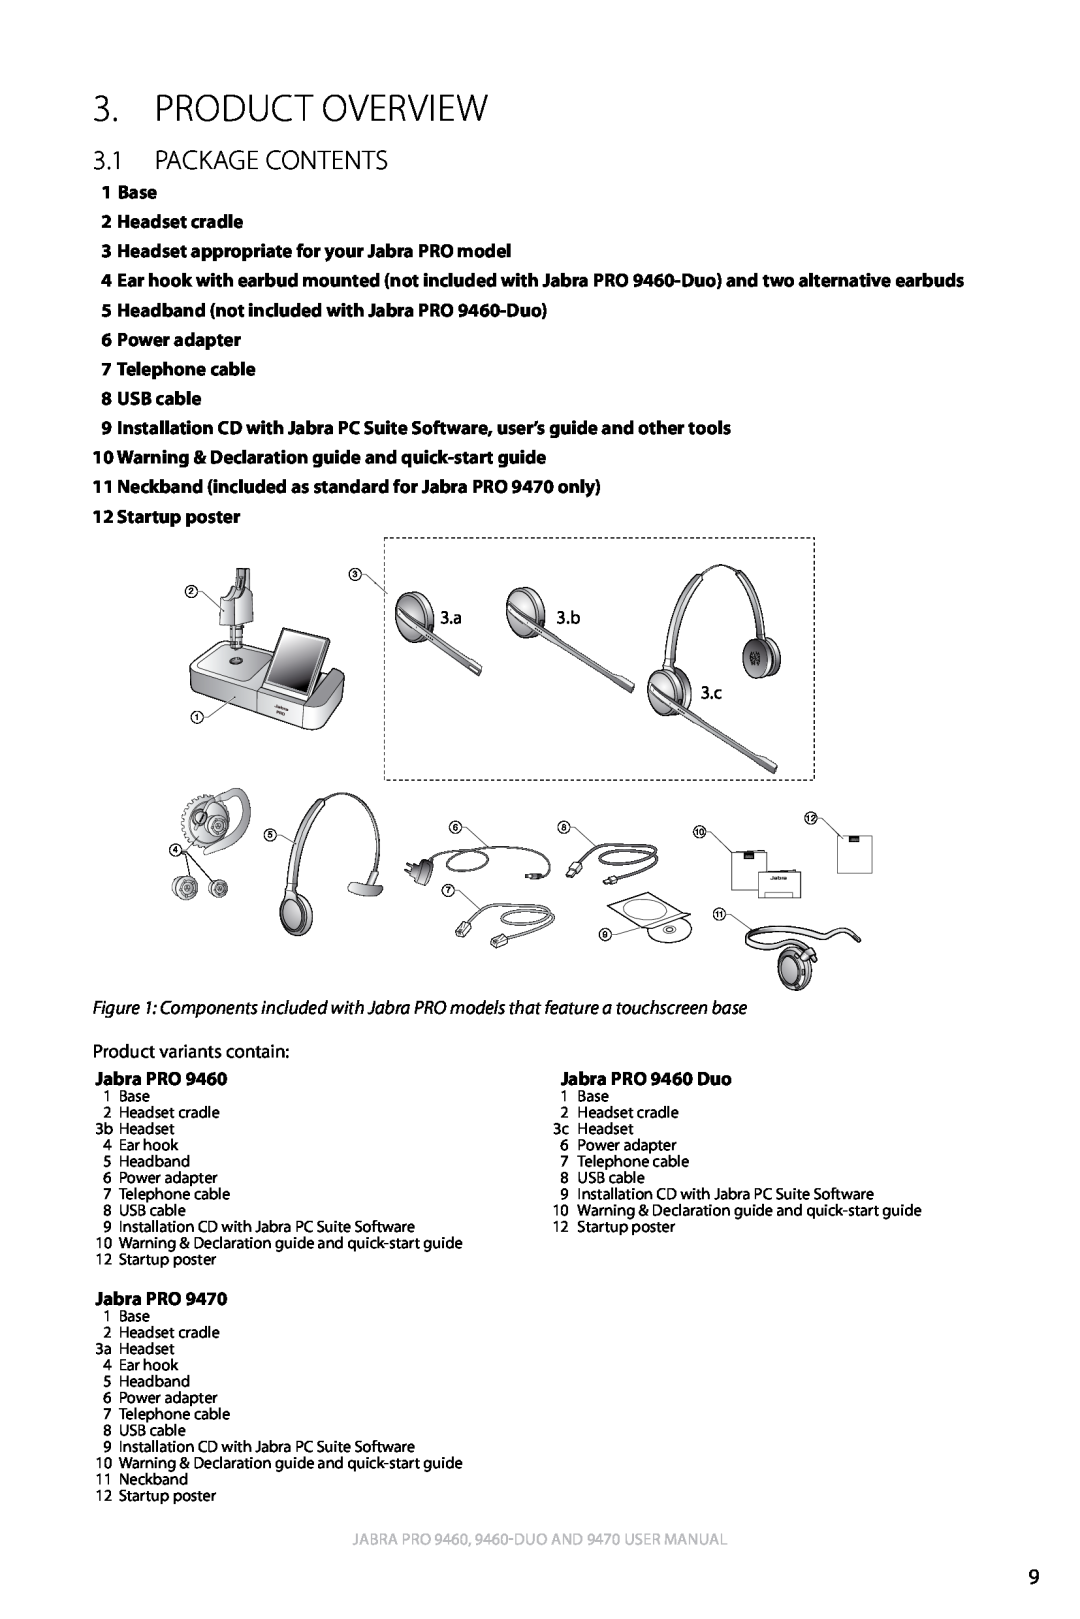 Lennox Hearth 9470 user manual Product Overview, 3.1Package Contents, english 